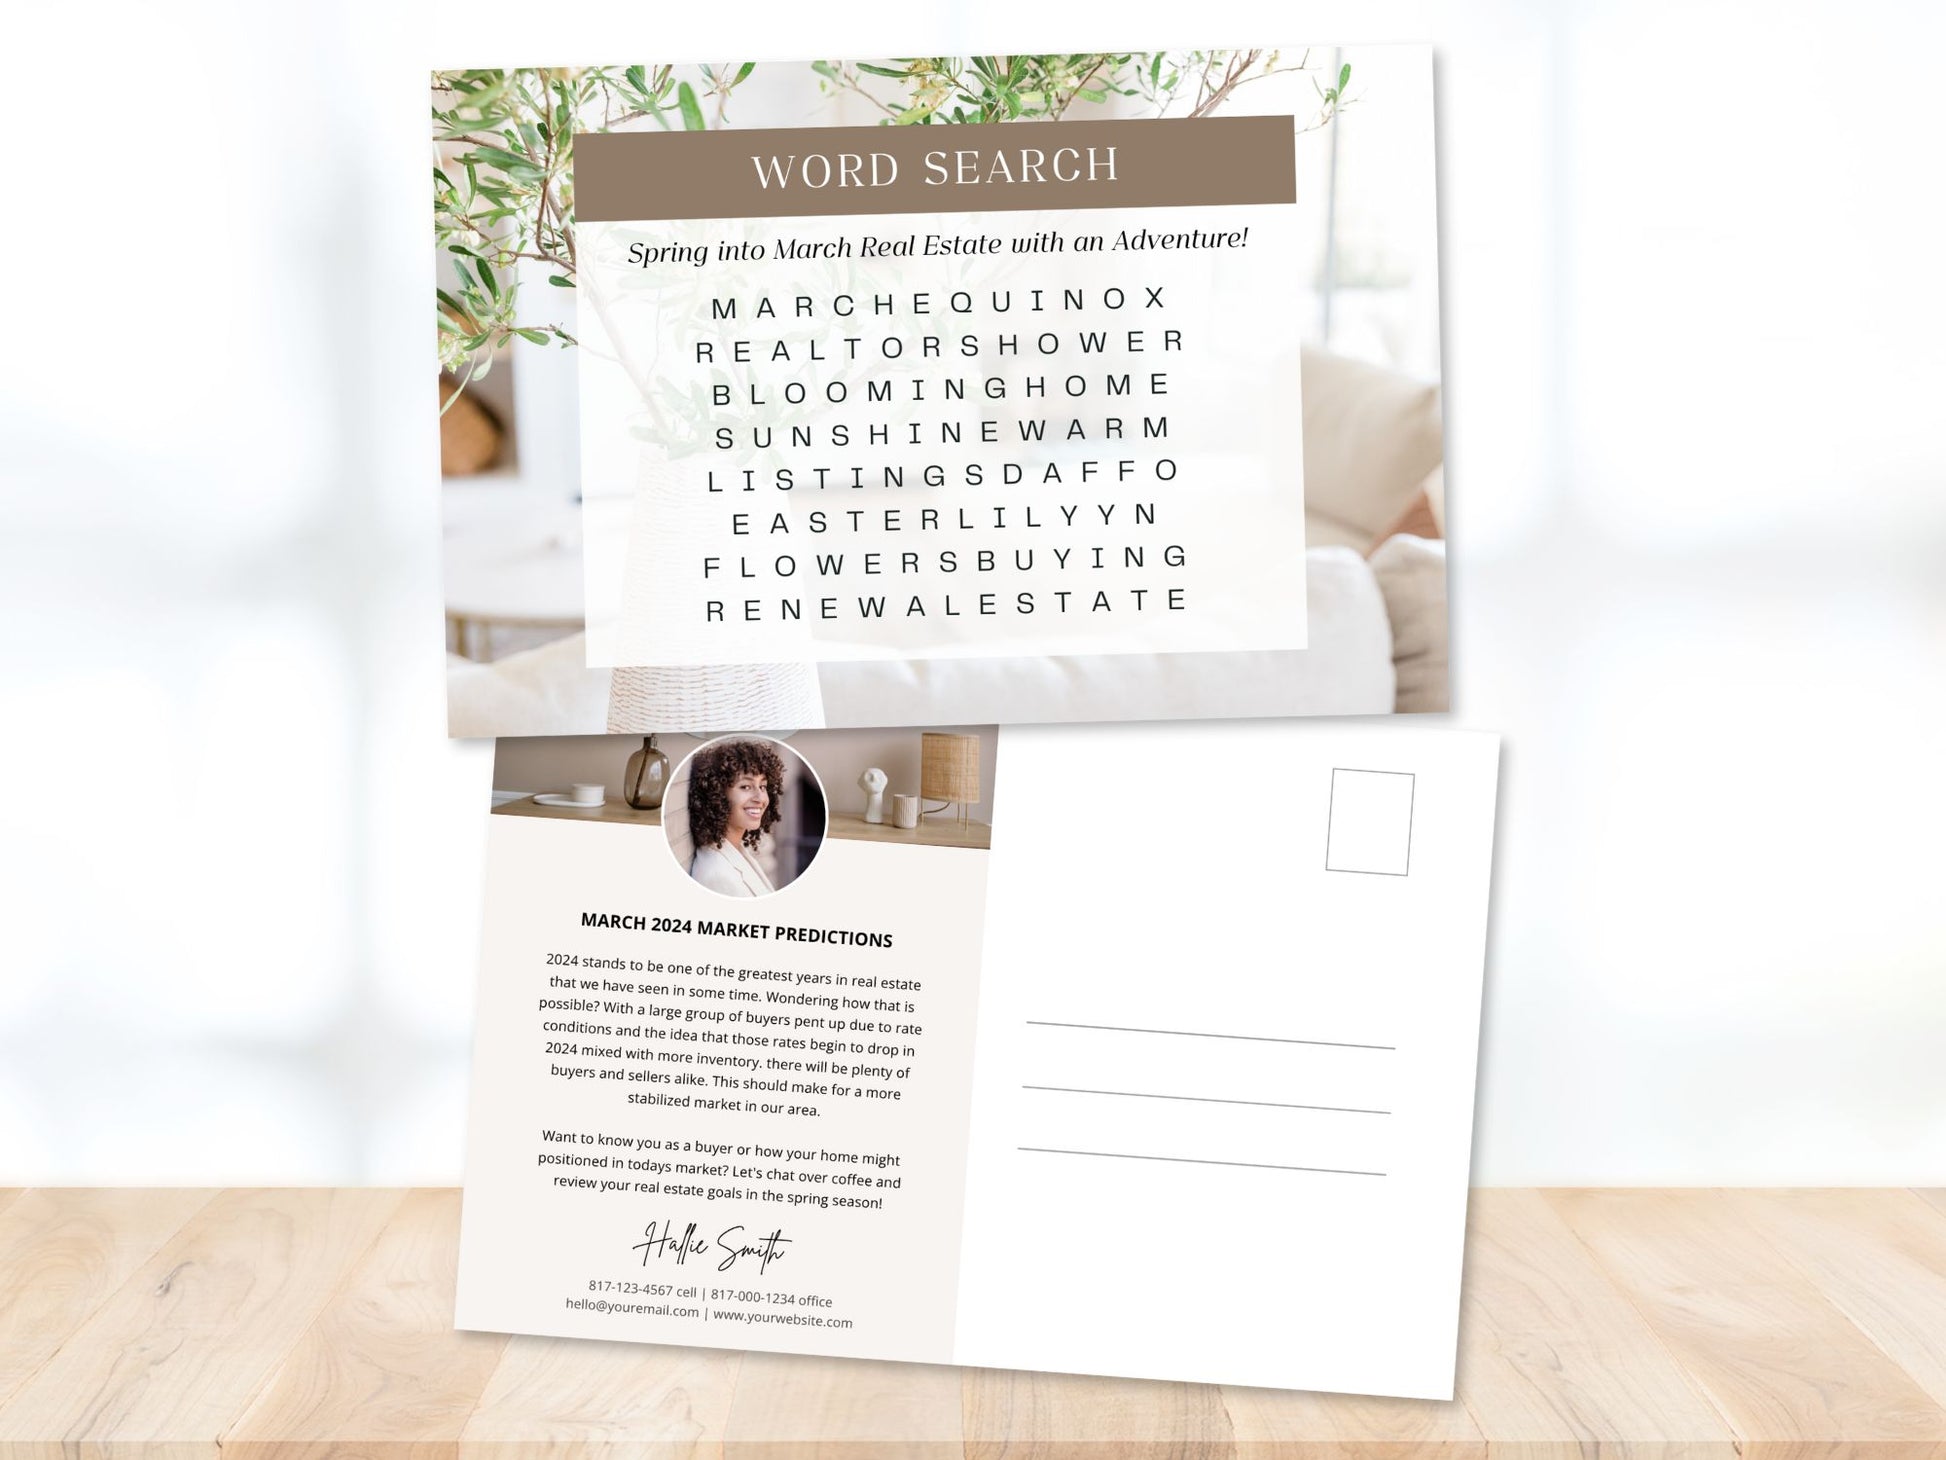 March Word Search Postcard - Professionally designed real estate postcard featuring a fun and interactive March-themed word search.